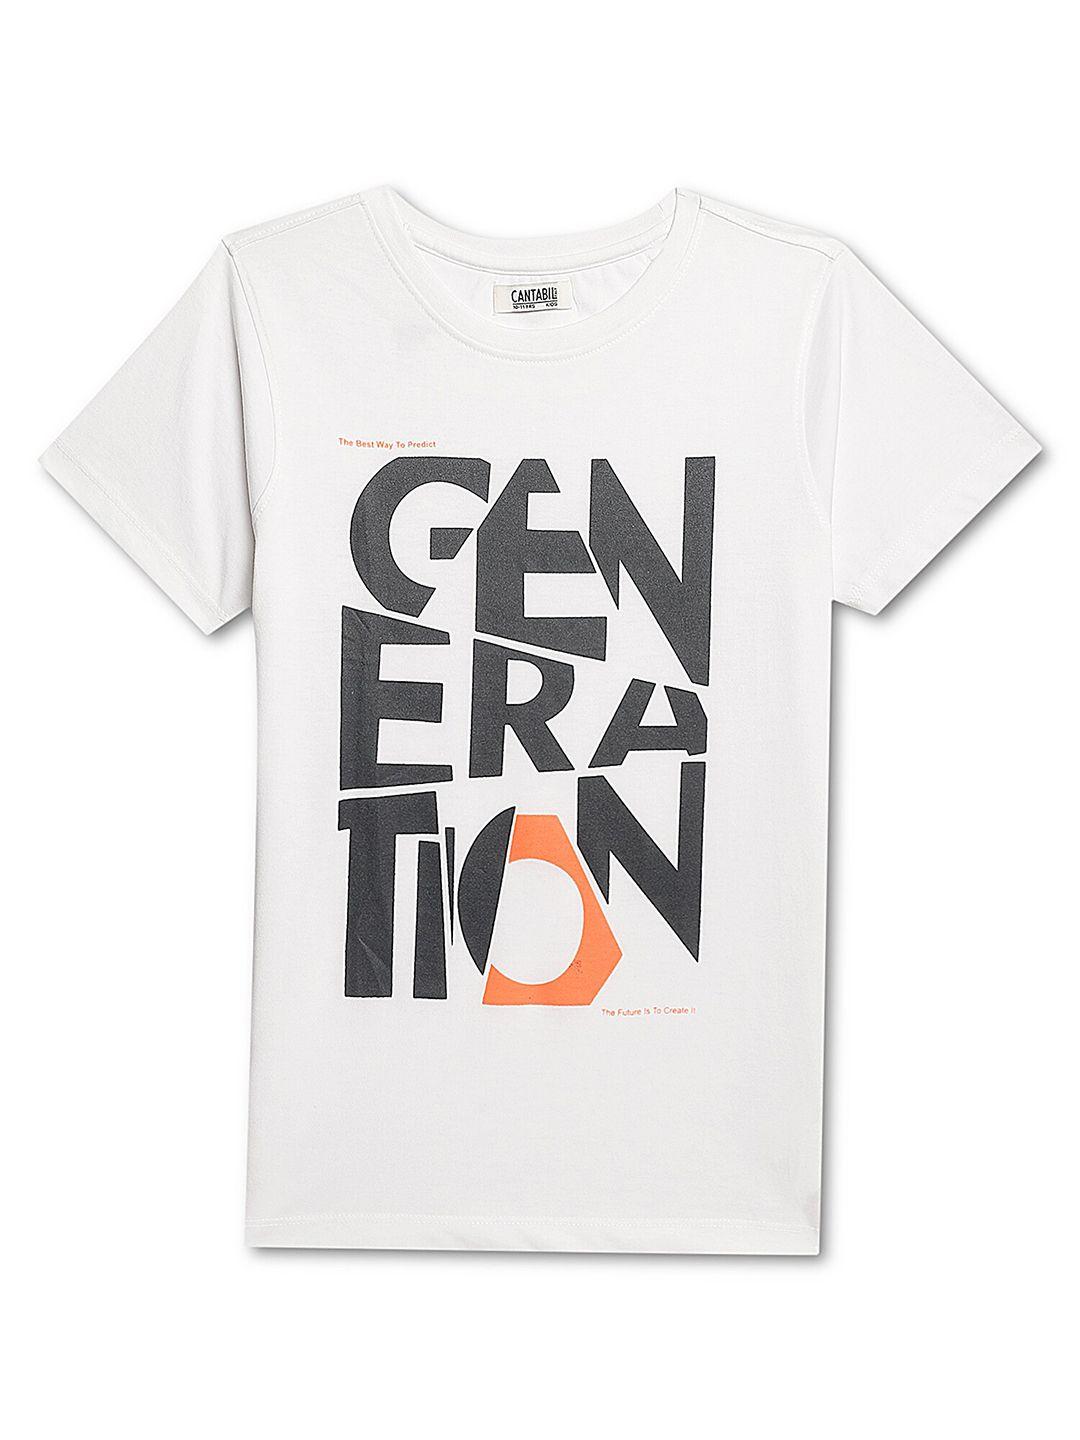 cantabil-boys-typography-printed-cotton-t-shirt